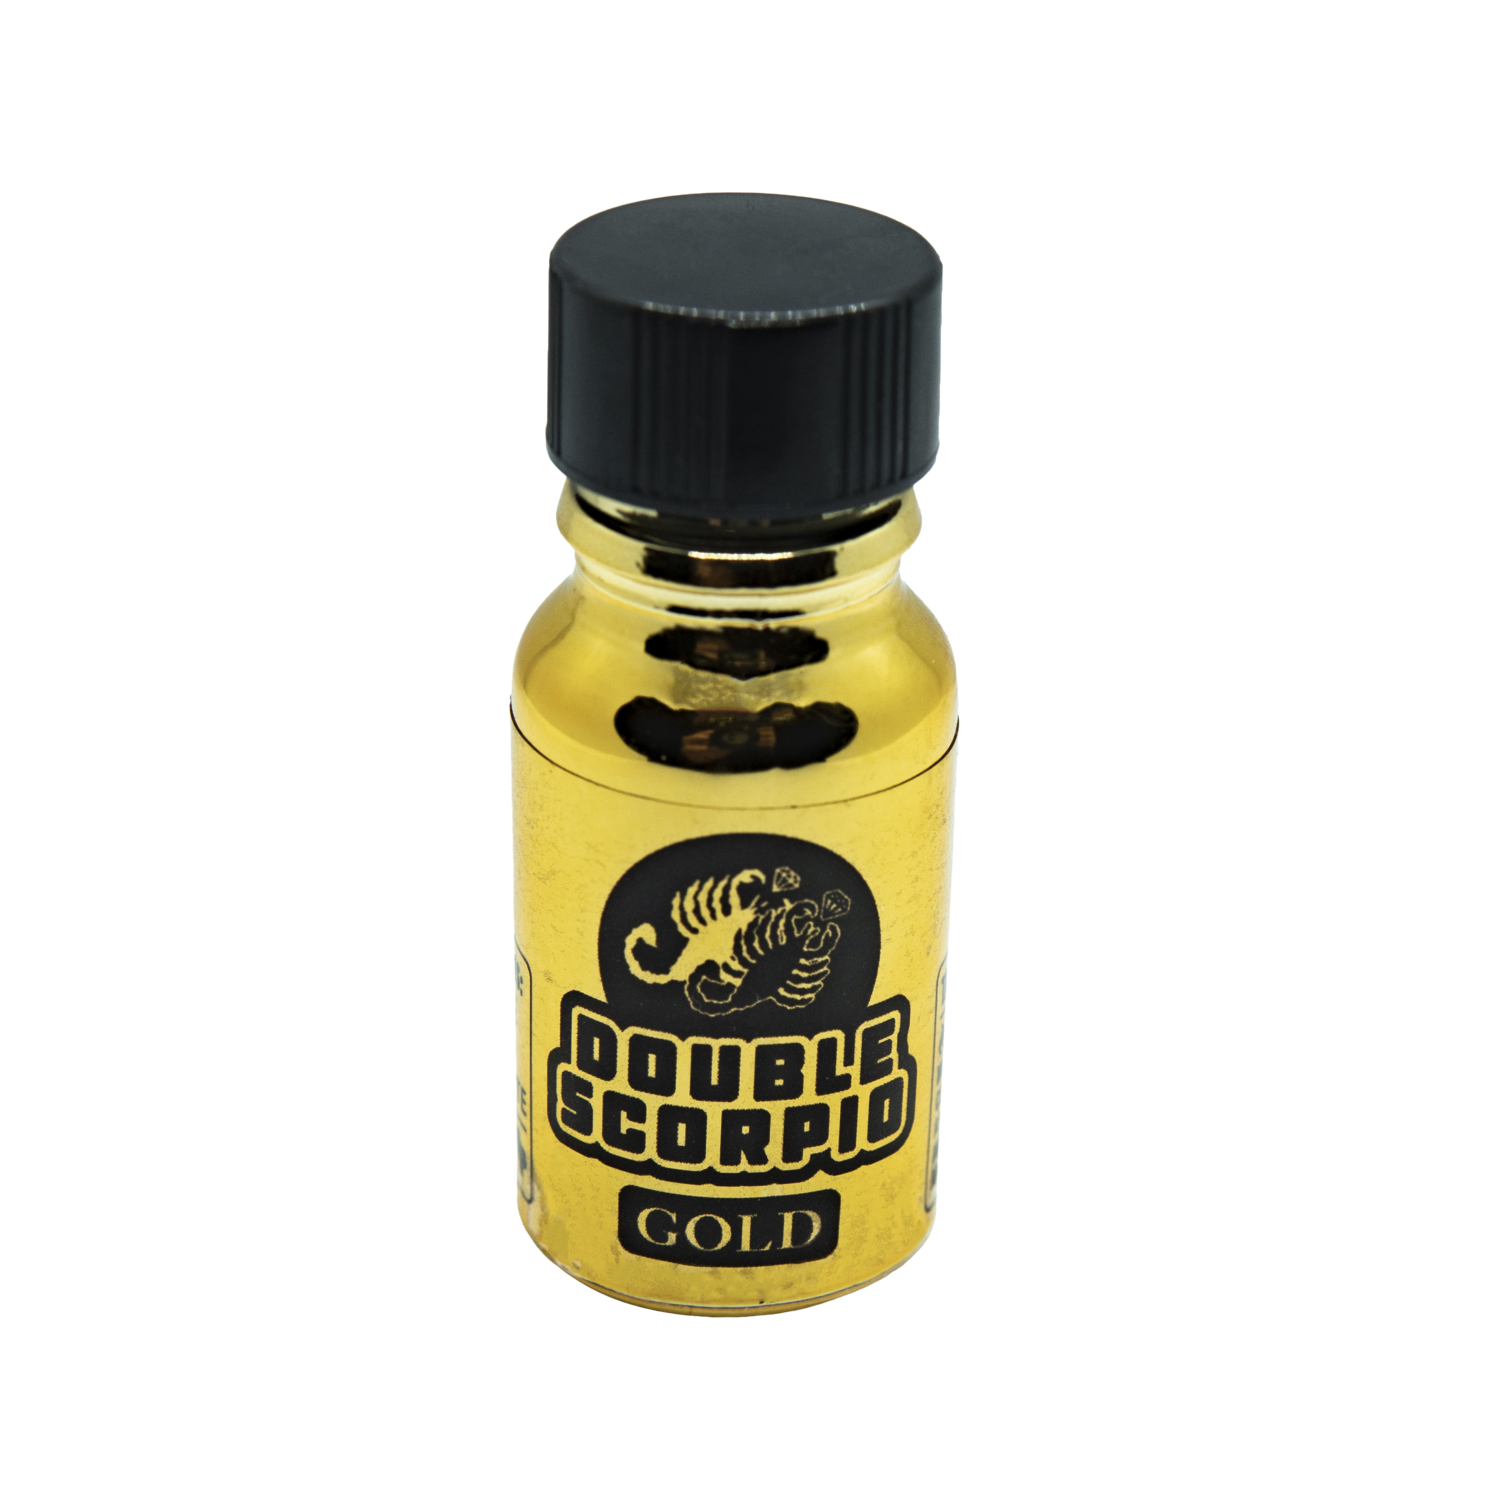 Double Scorpio Gold Harness Cleaner- 10mL